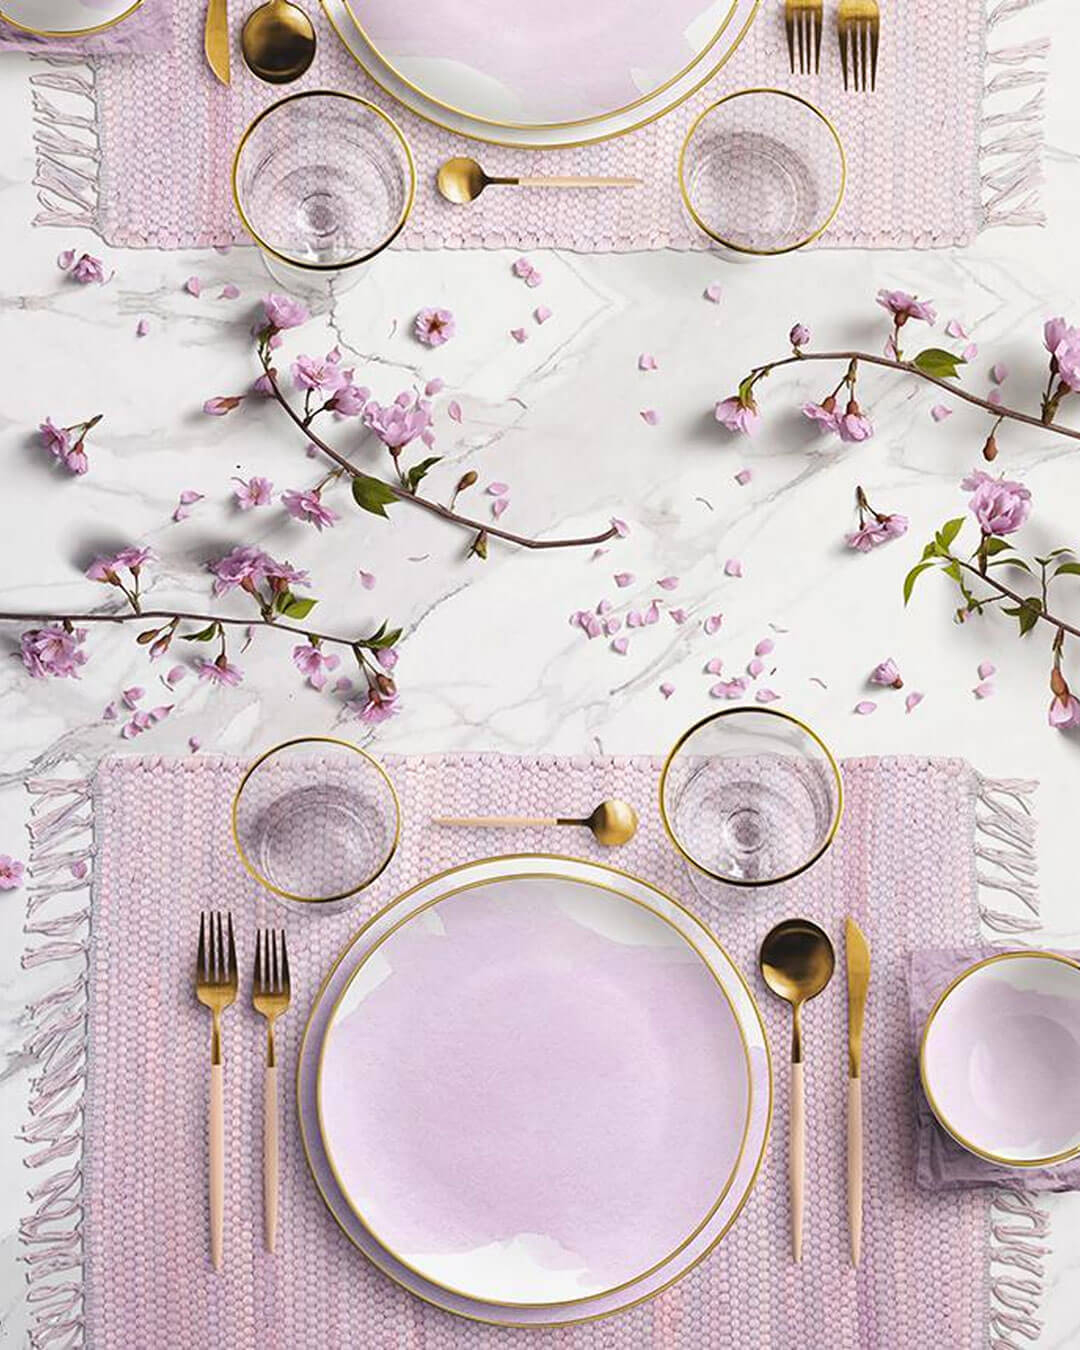 pillowpia's lilac placemats